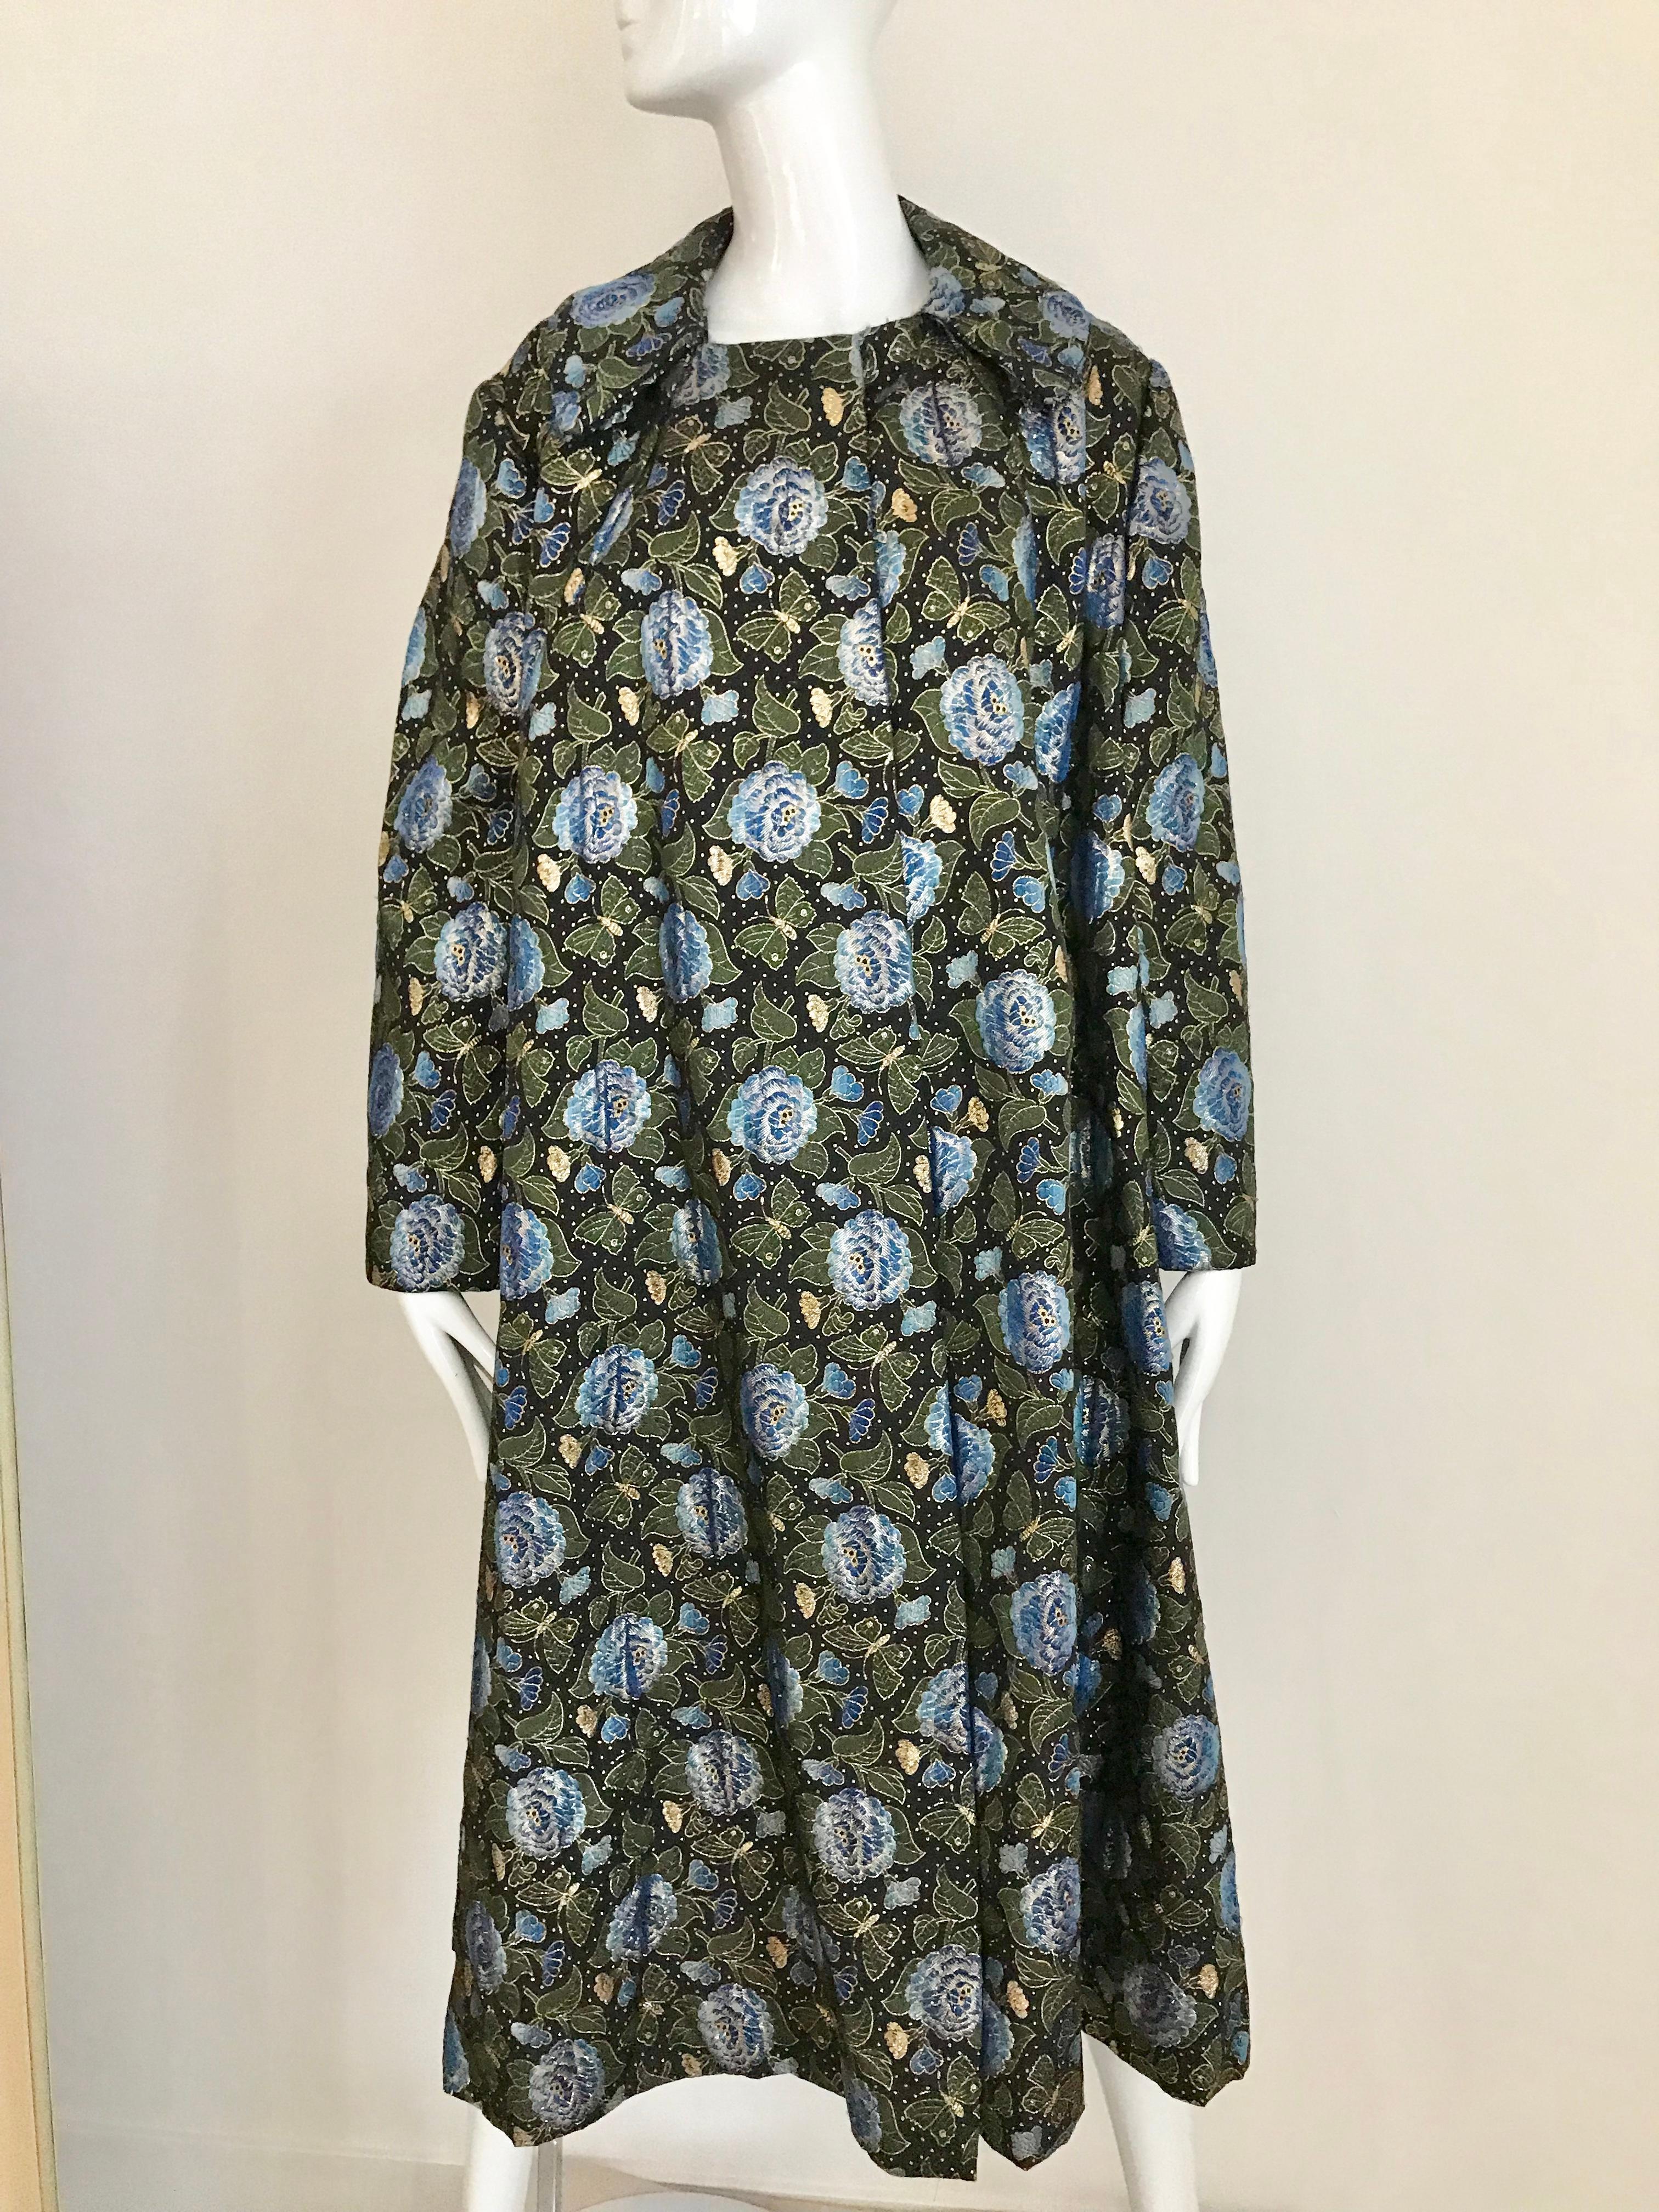 Late 50s Beautiful blue and green brocade swing coat with butterfly and flower pattern. 
Size X large
Bust: 52 inches/ coat length : 43.5”
Sleeve length 22 inches